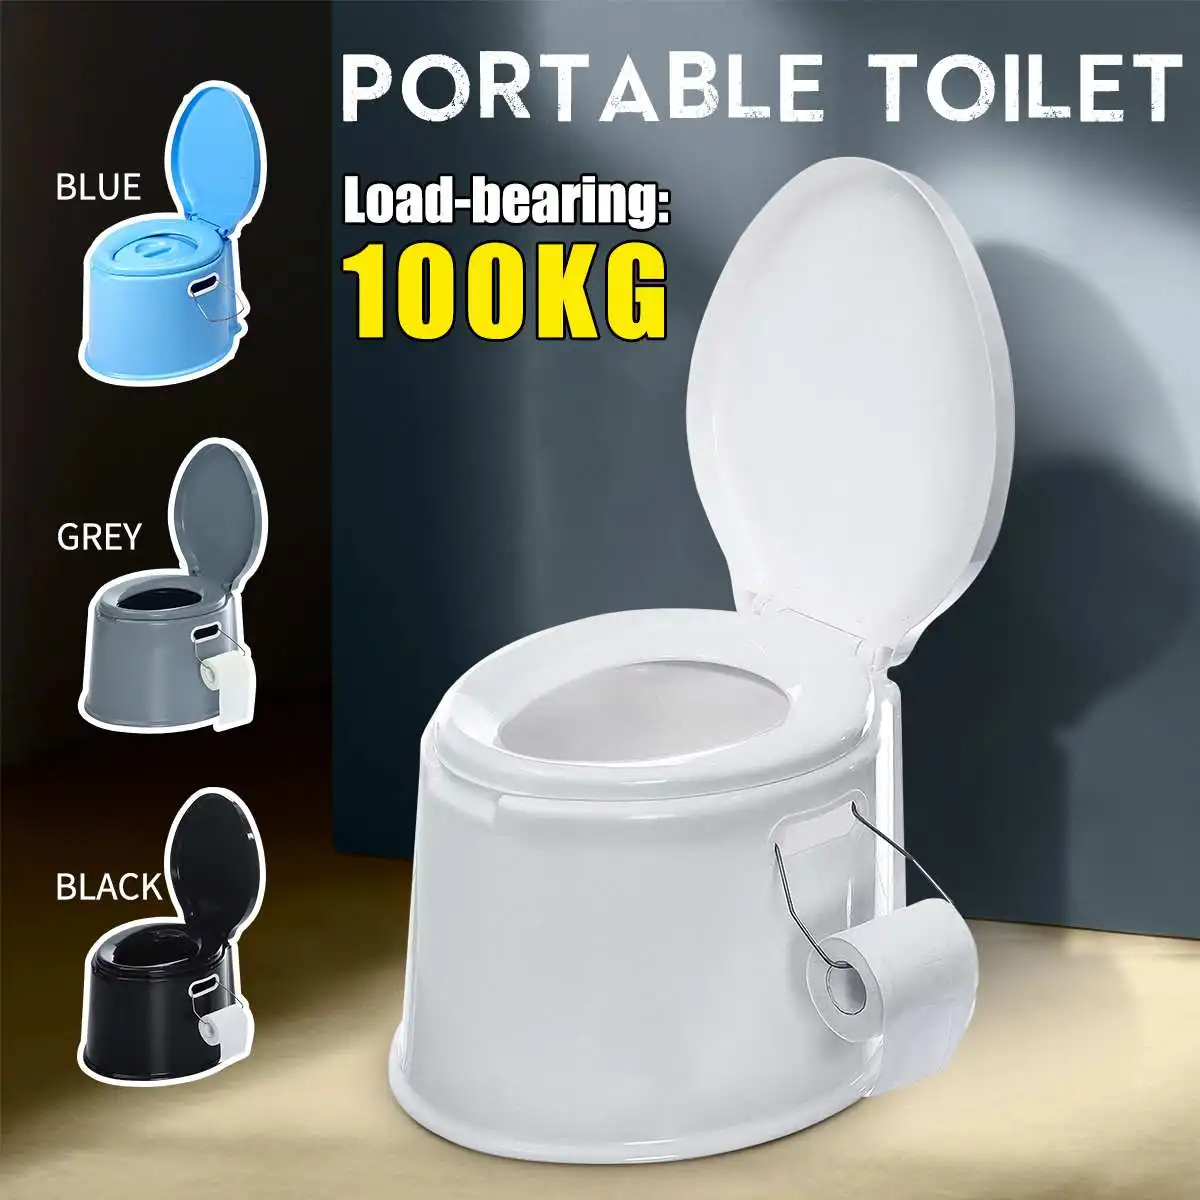 Portable Urinal Bottle for Male Lady Car Travel Camping Toilet Loo 1L White/Blue 